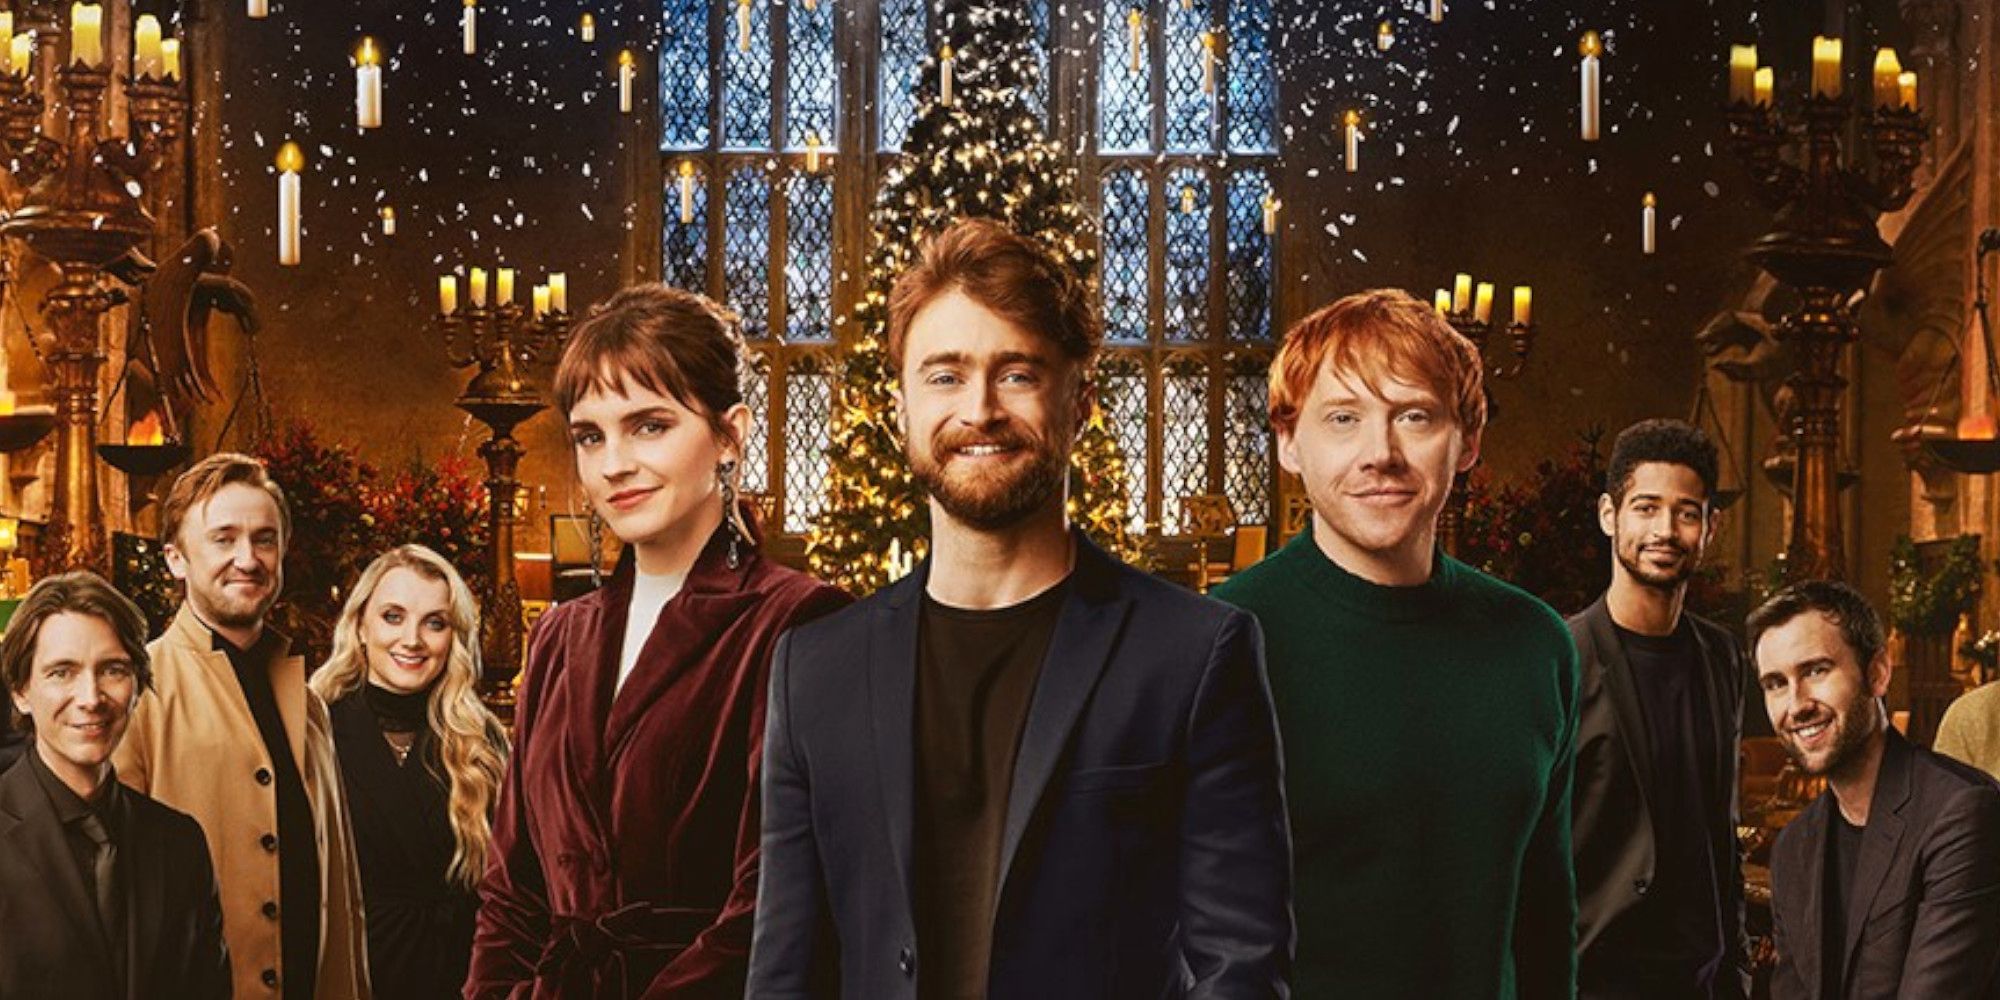 Will Harry Potter reunion be available at midnight?